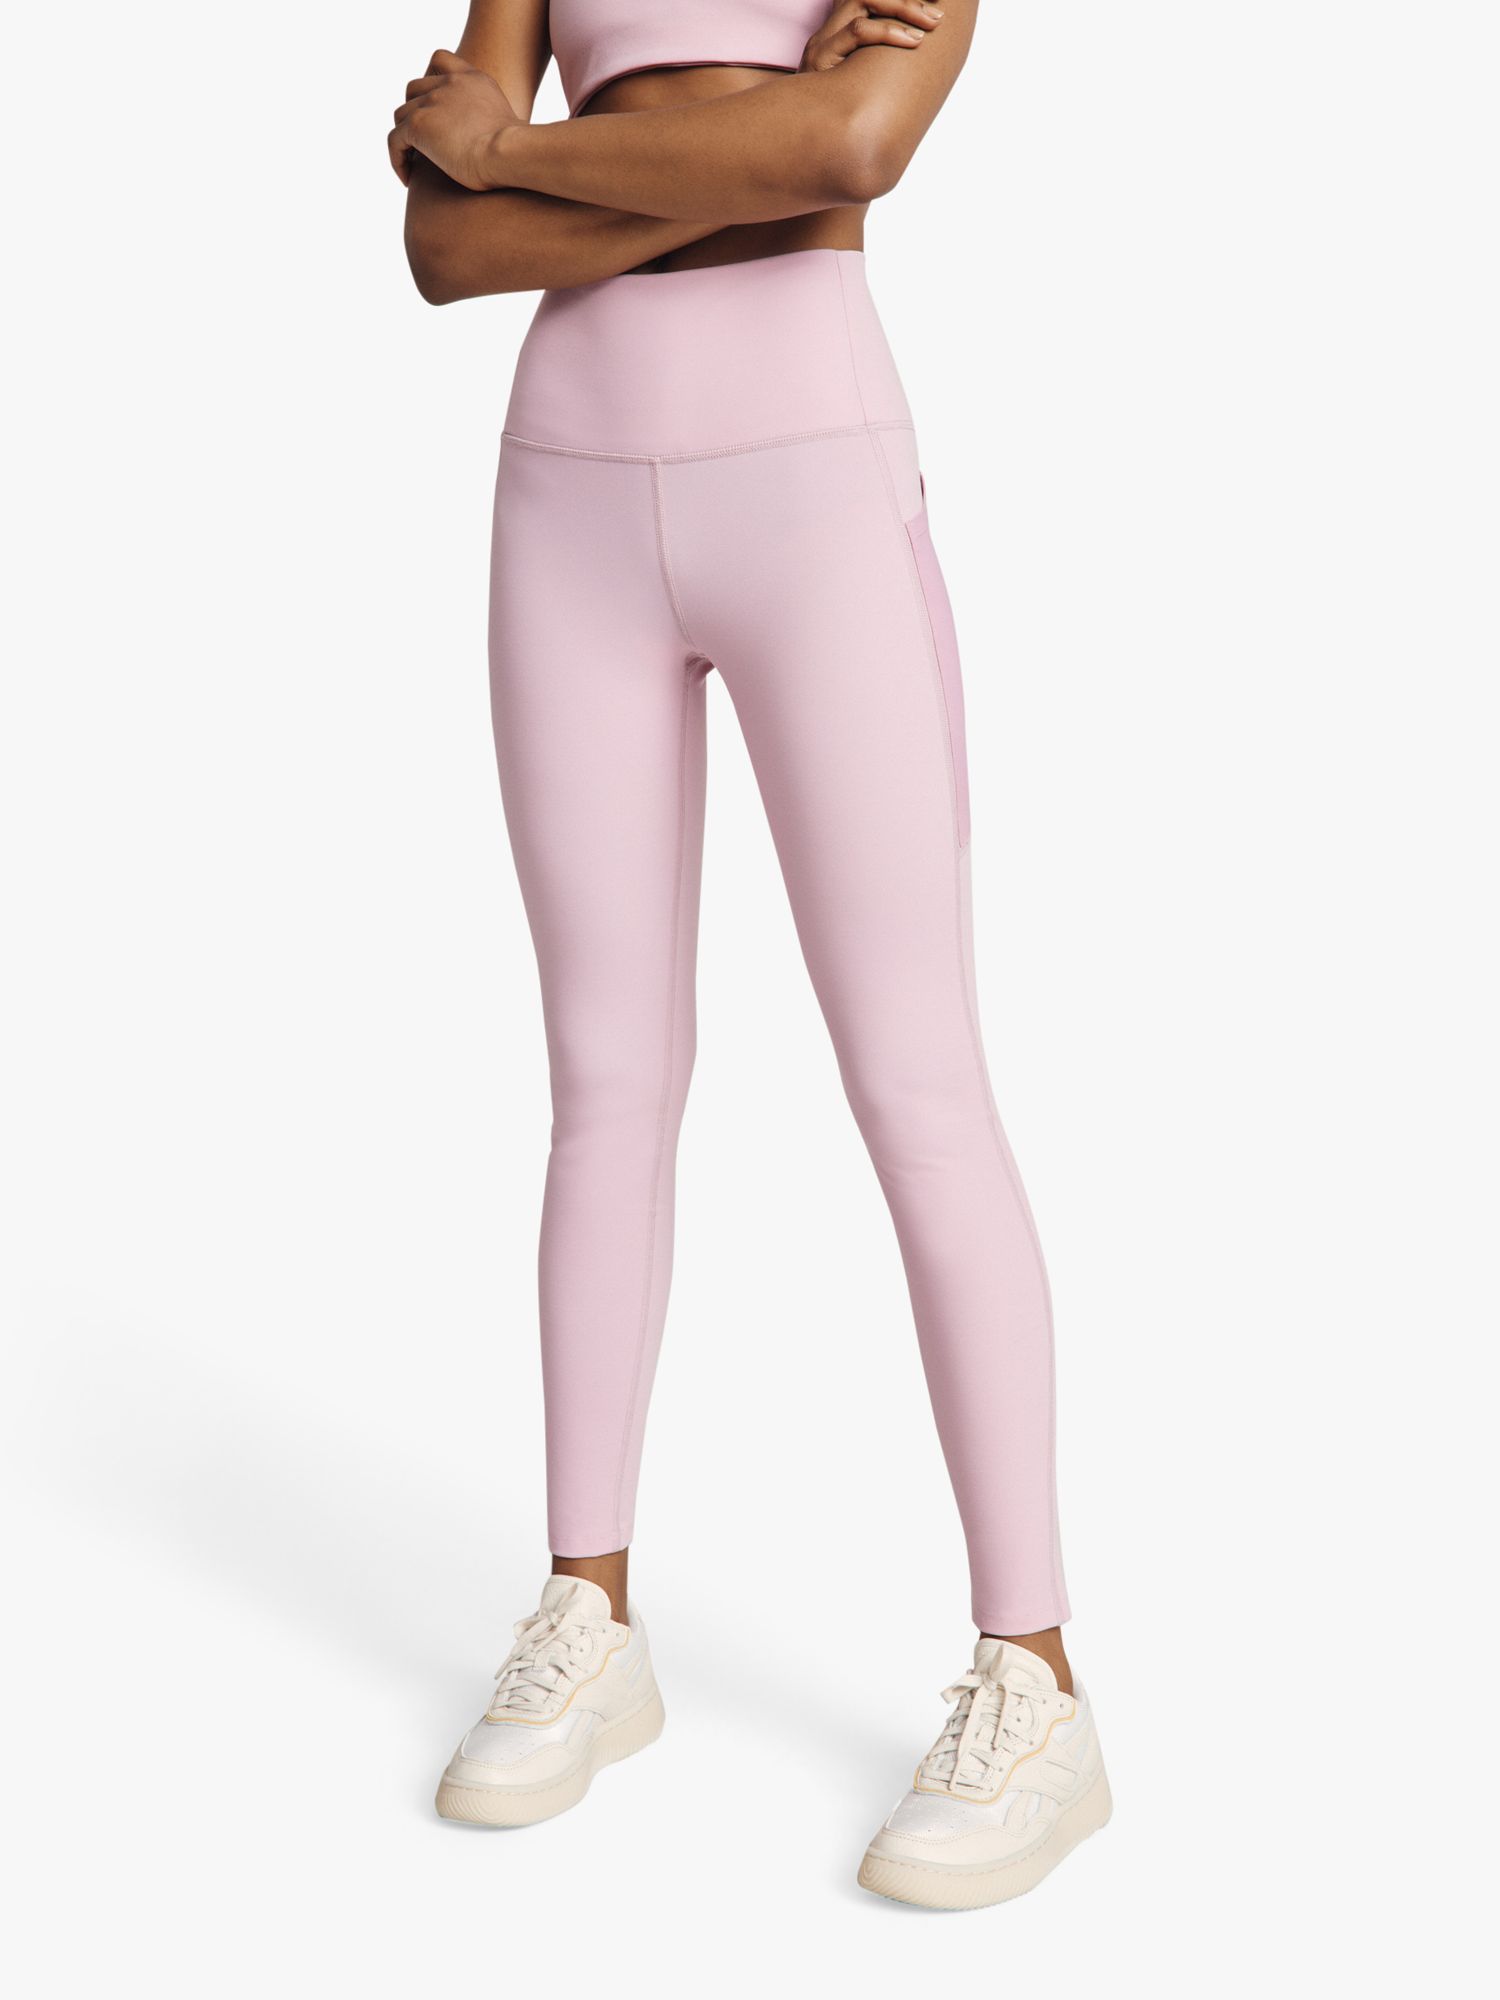 Ghost High Waisted Leggings, Dusted Mauve